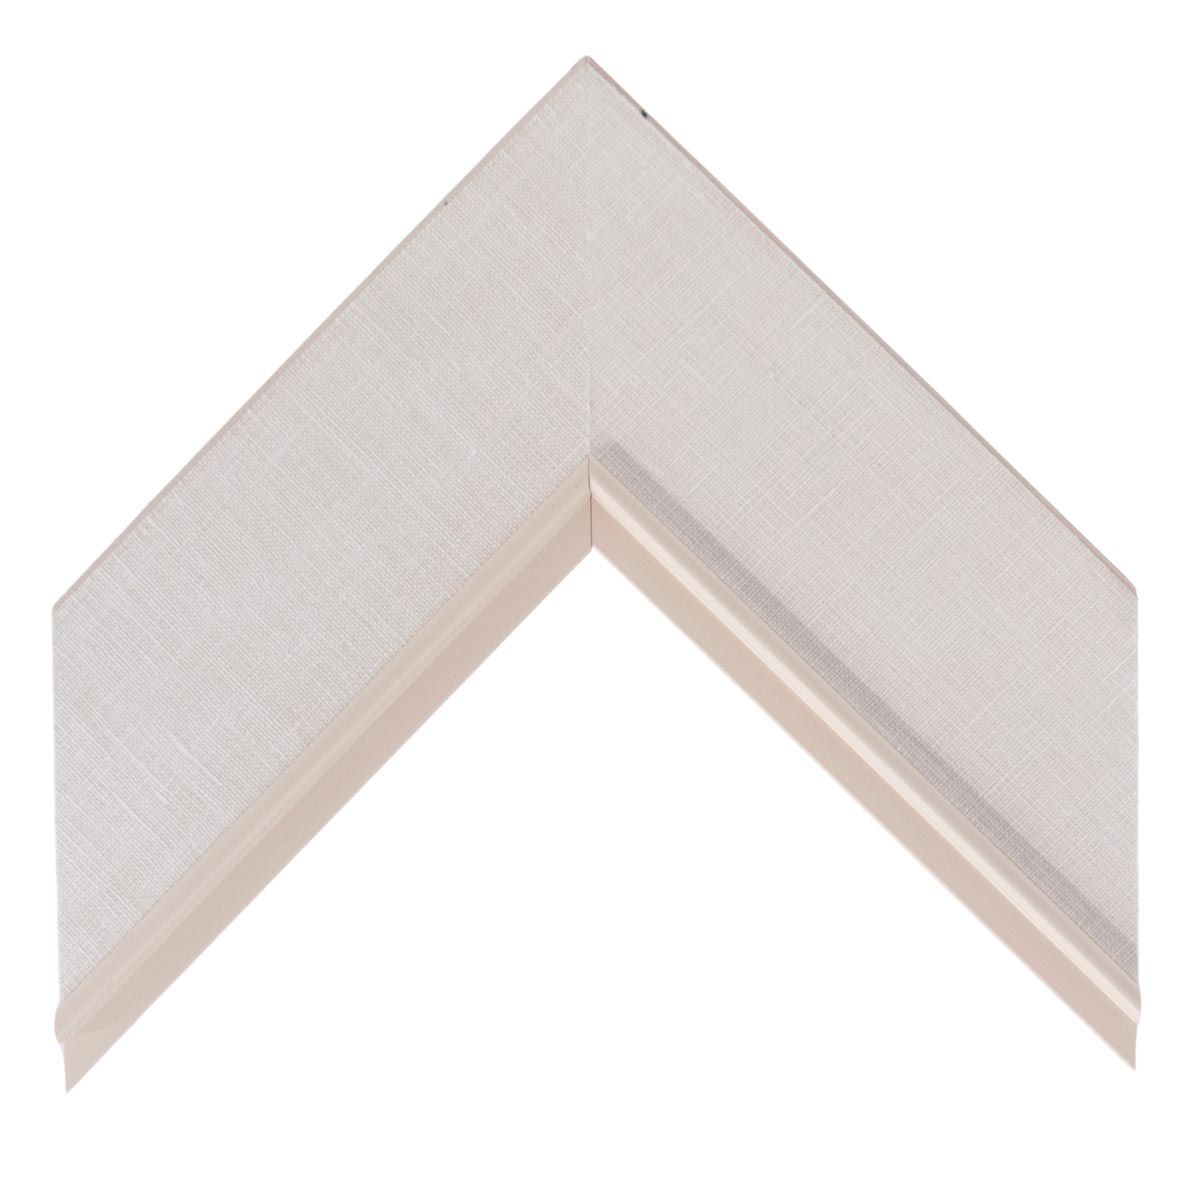 Linen Liner Moulding - Natural, White Bead ML120-2 ¾ inches, 18 x 24 inches